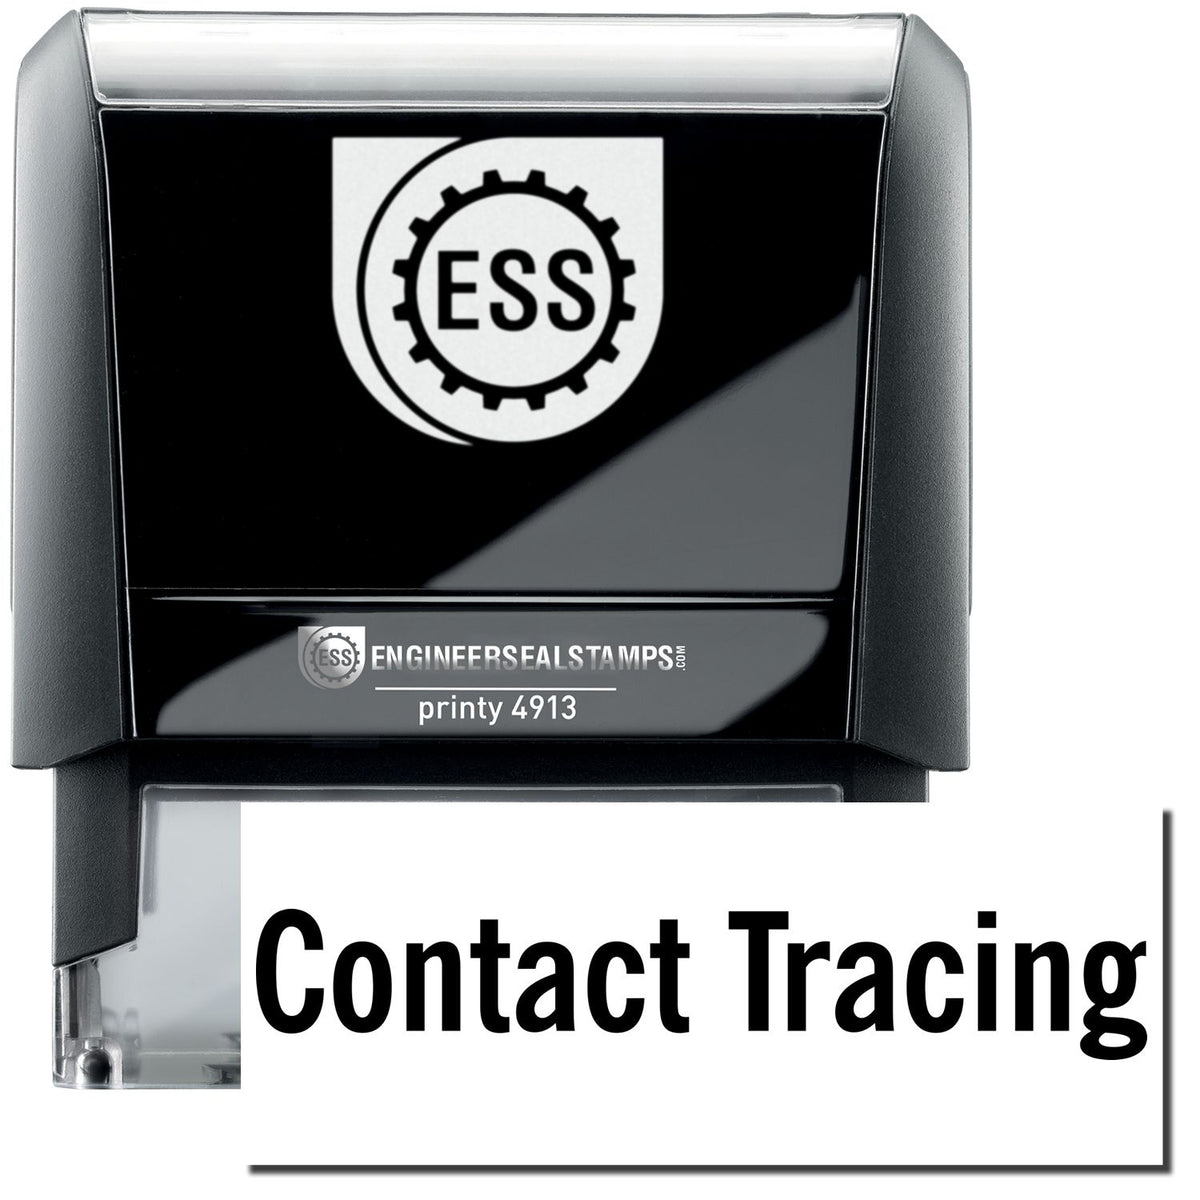 A self-inking stamp with a stamped image showing how the text &quot;Contact Tracing&quot; in a large font is displayed by it after stamping.